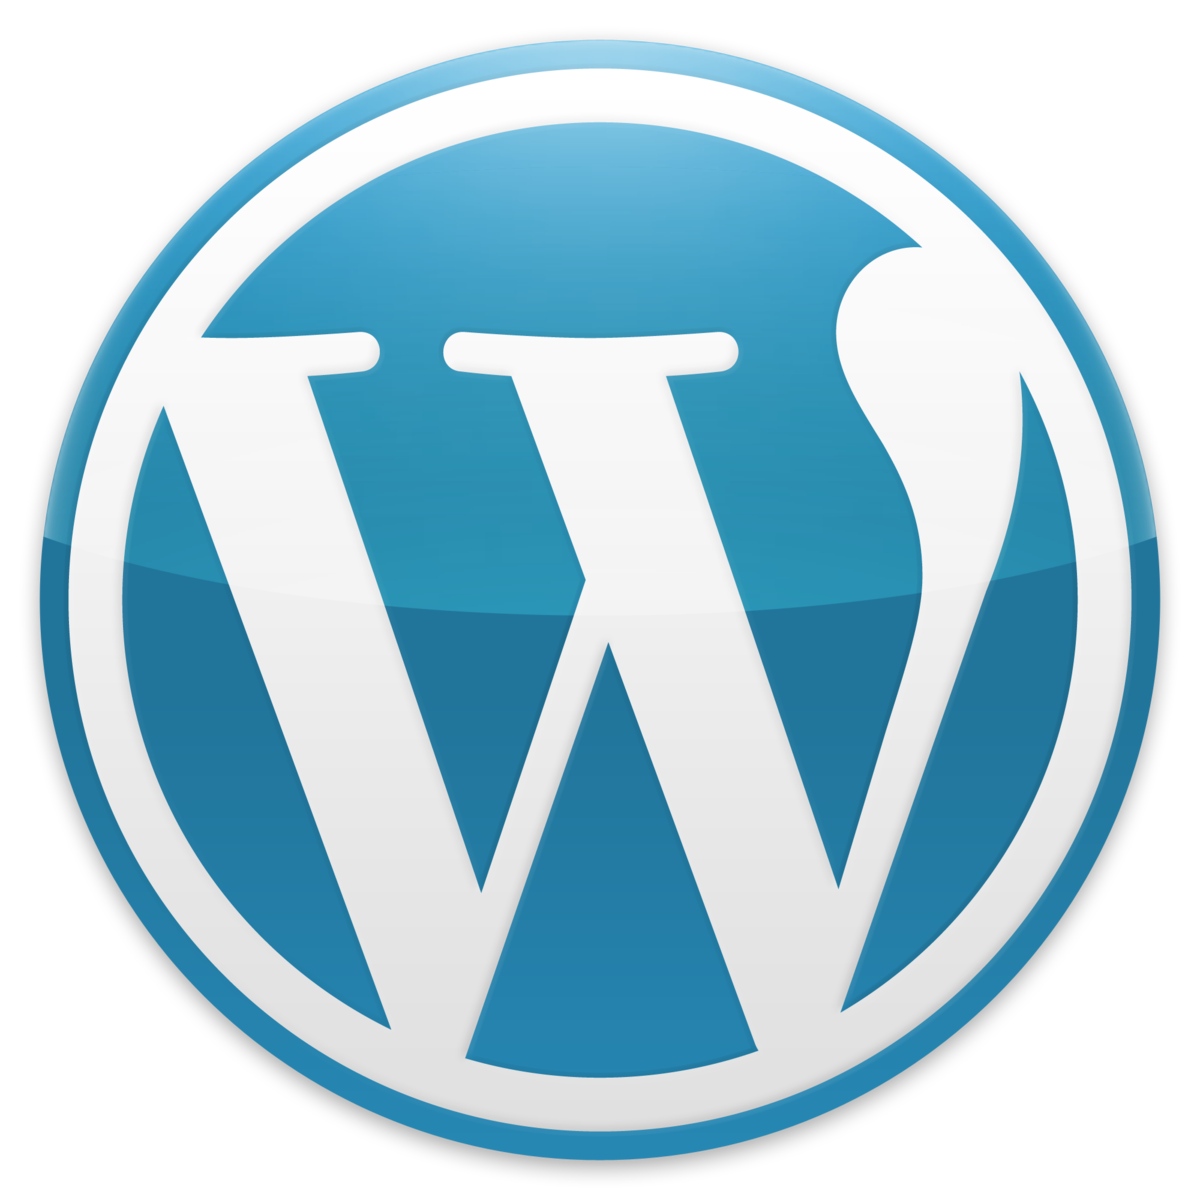 Symphysis Marketing has extensive experience with Wordpress